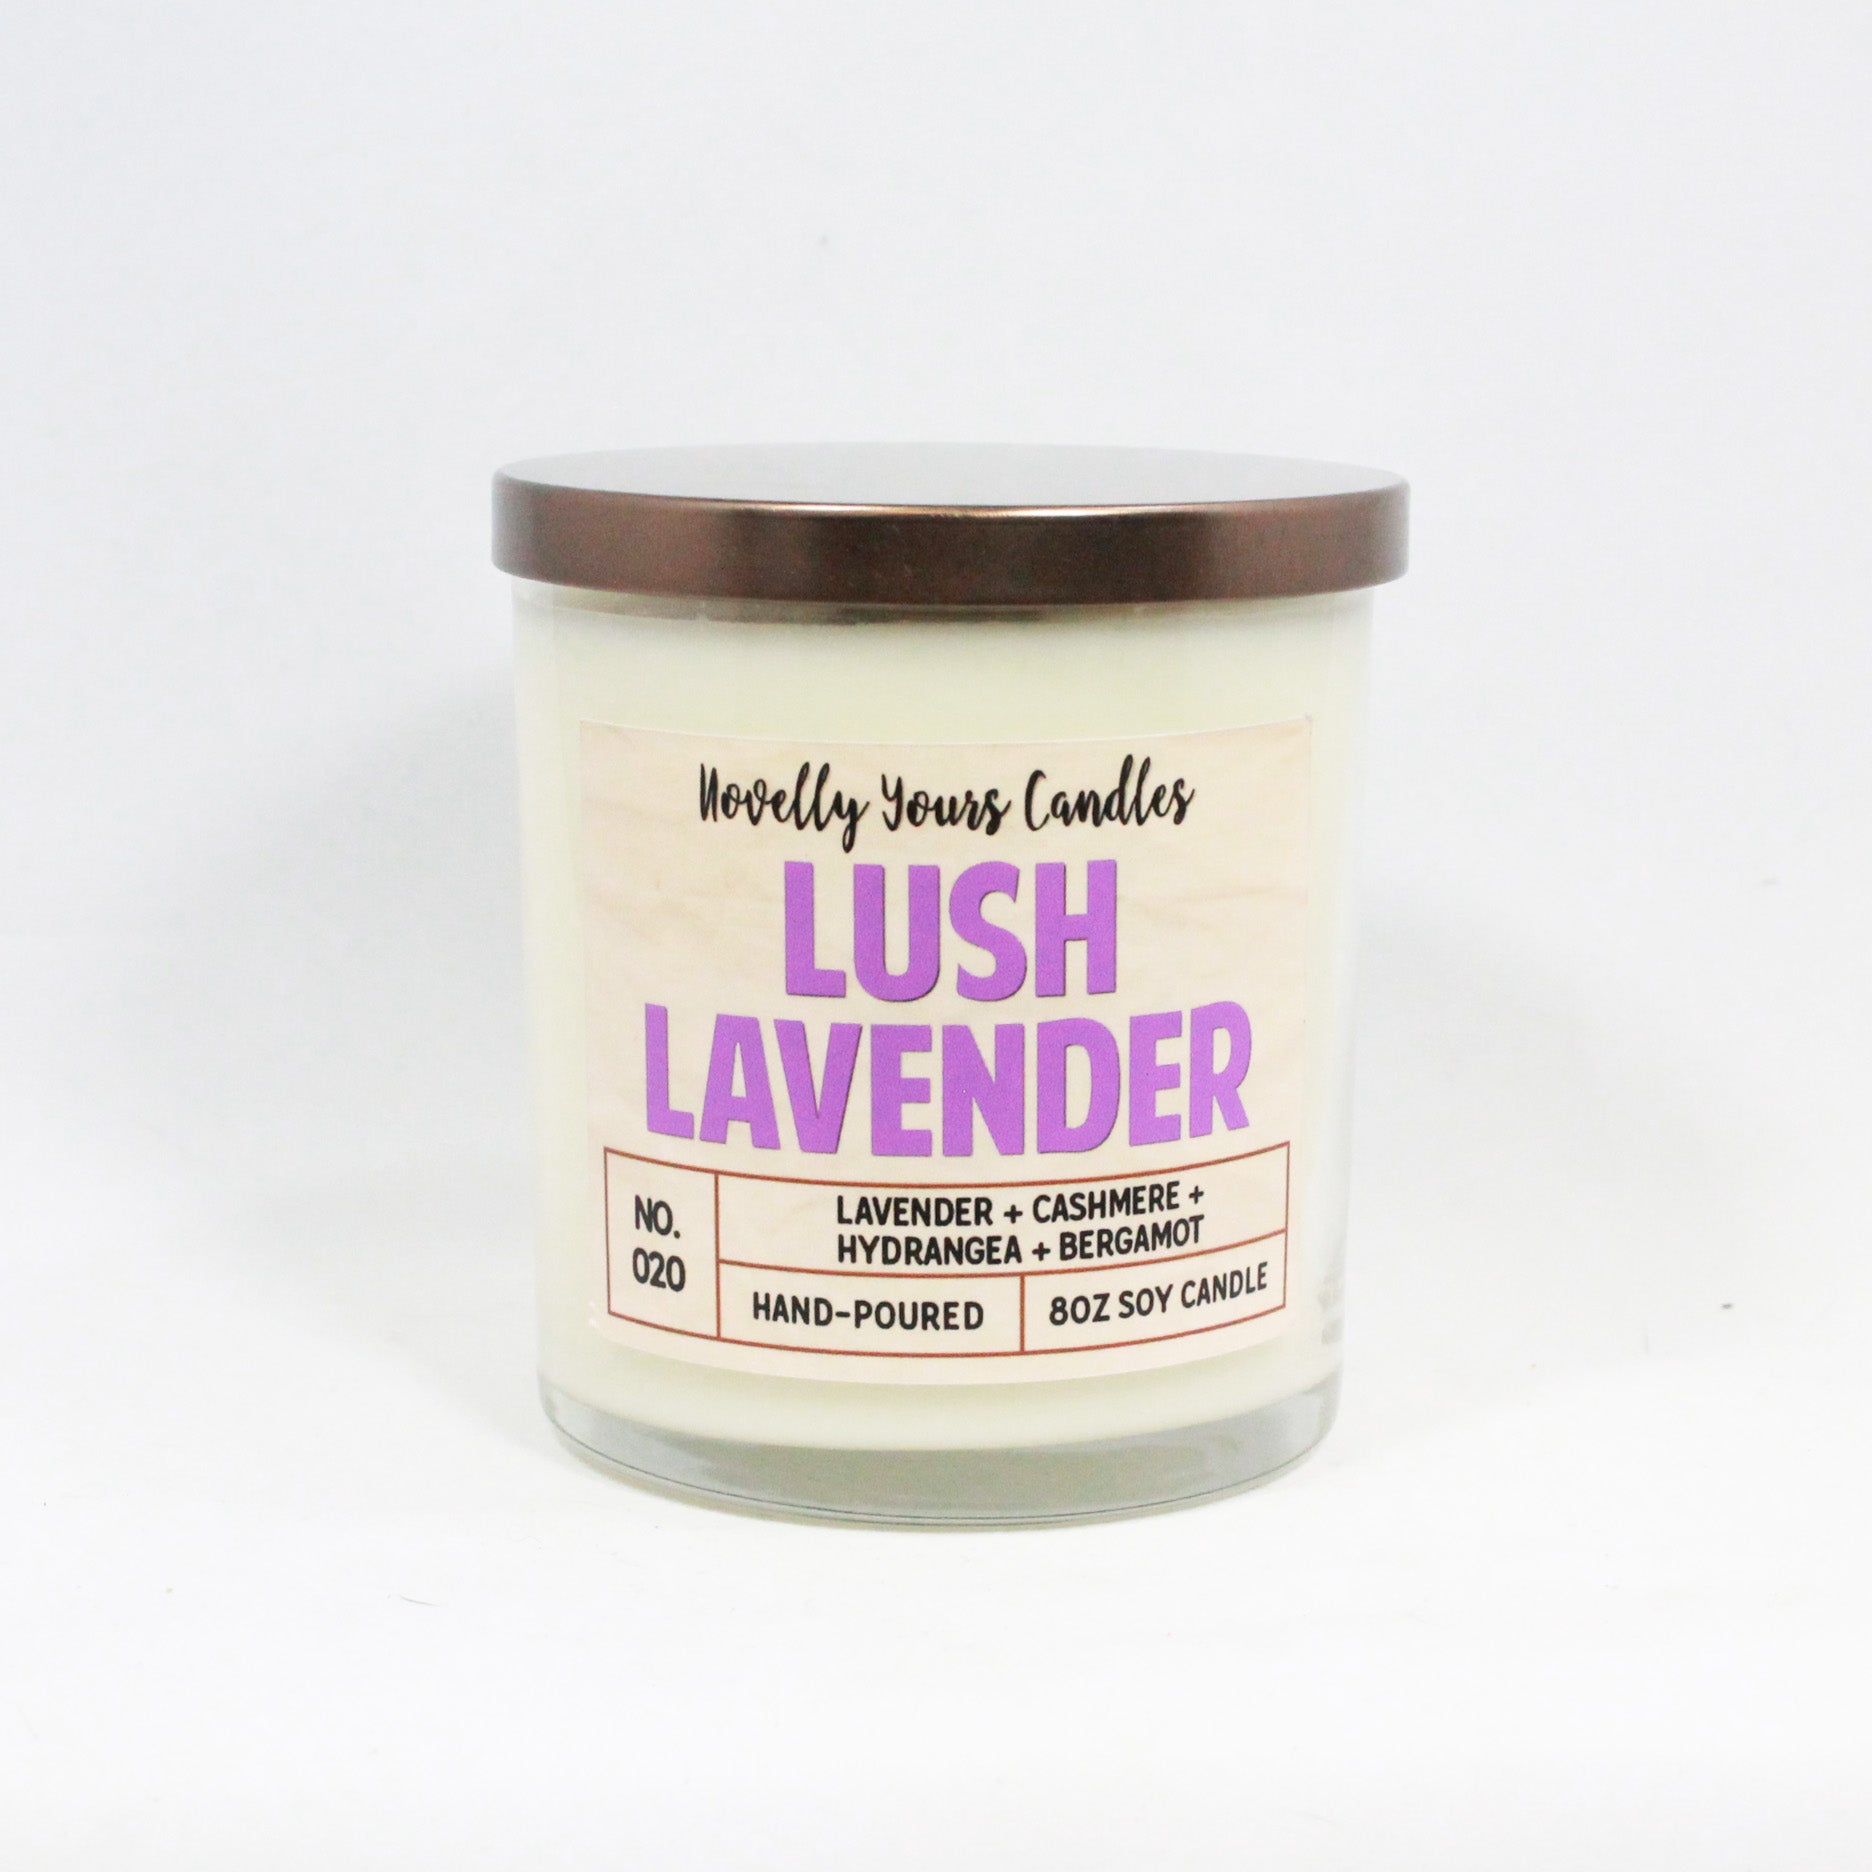 lush lavender scented soy wax candle in clear glass tumbler with bronze lid